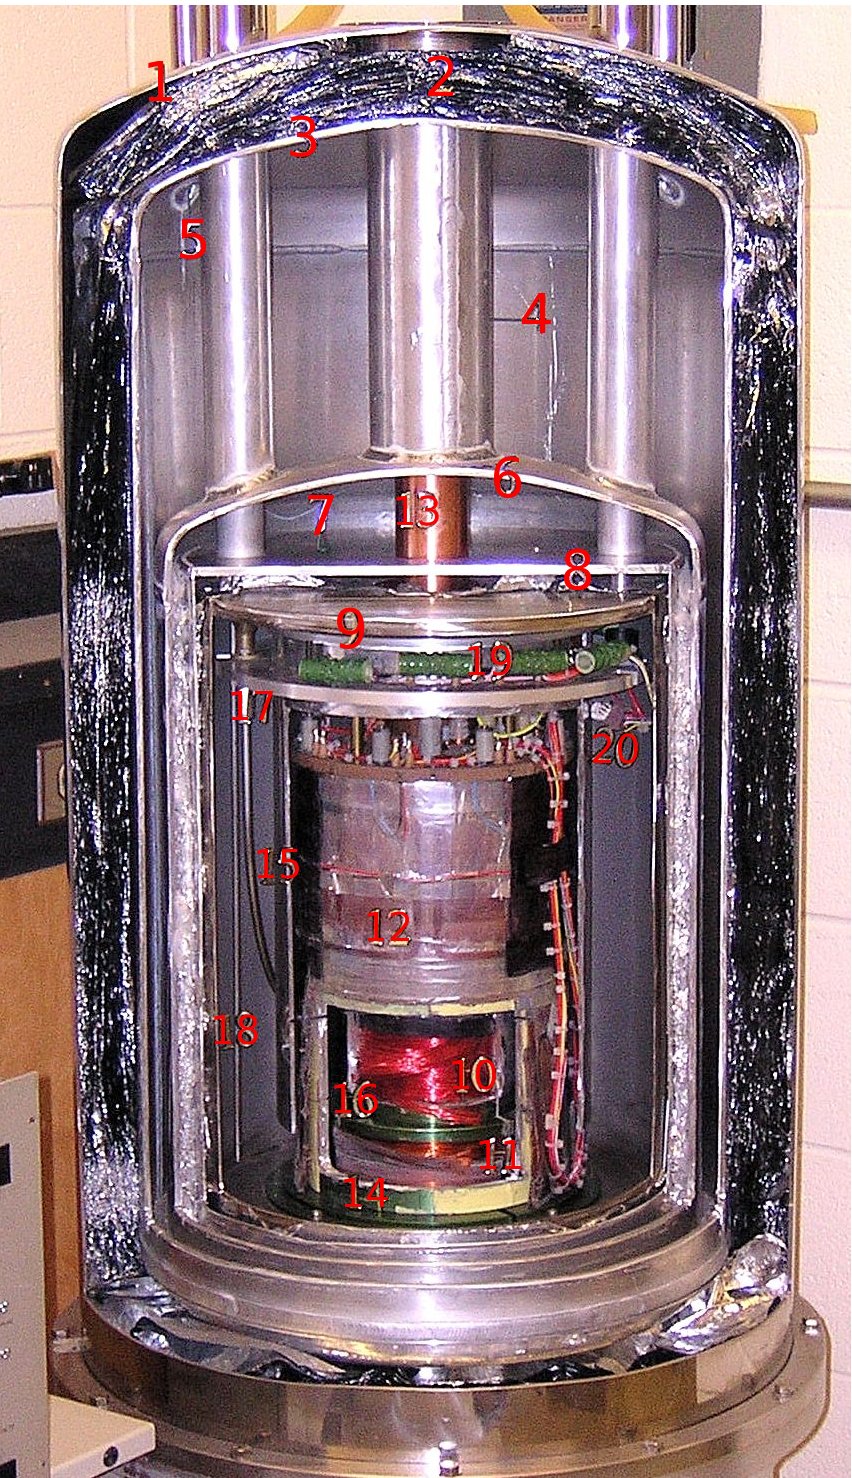 Cross-section of a NMR magnet